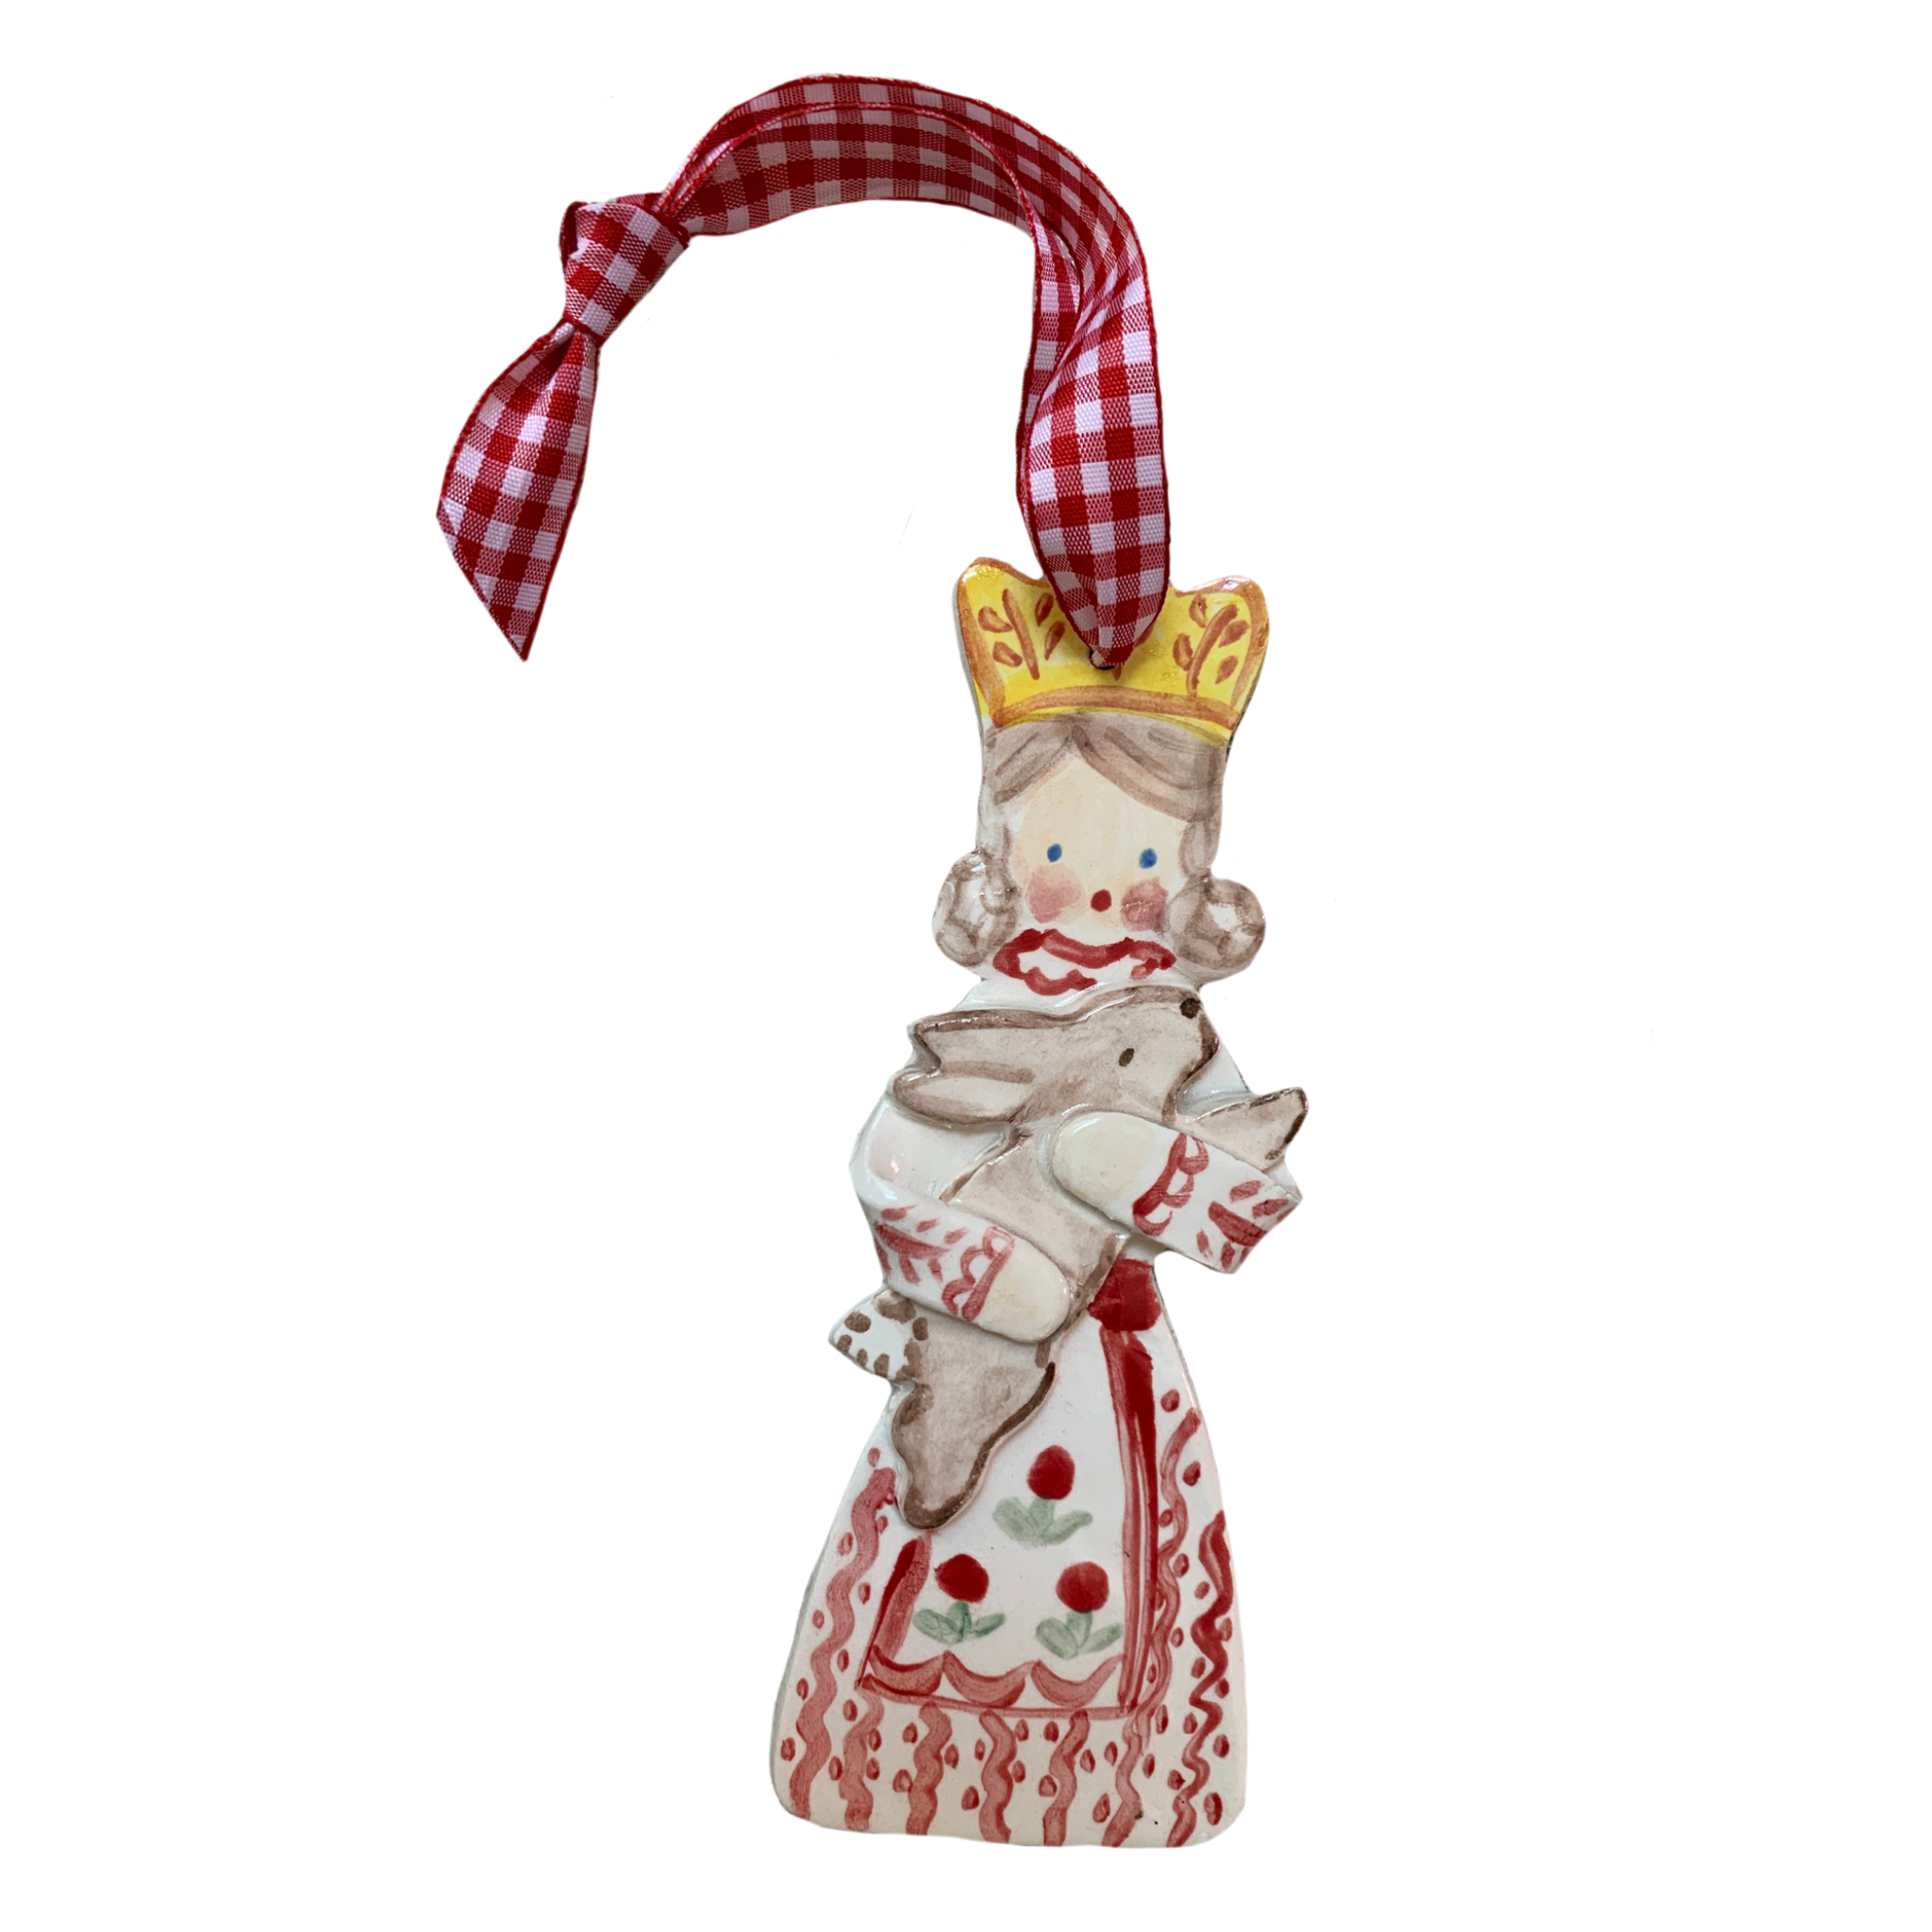 Crown Girl with Bunny Ornament - Tricia Lowenfield Design